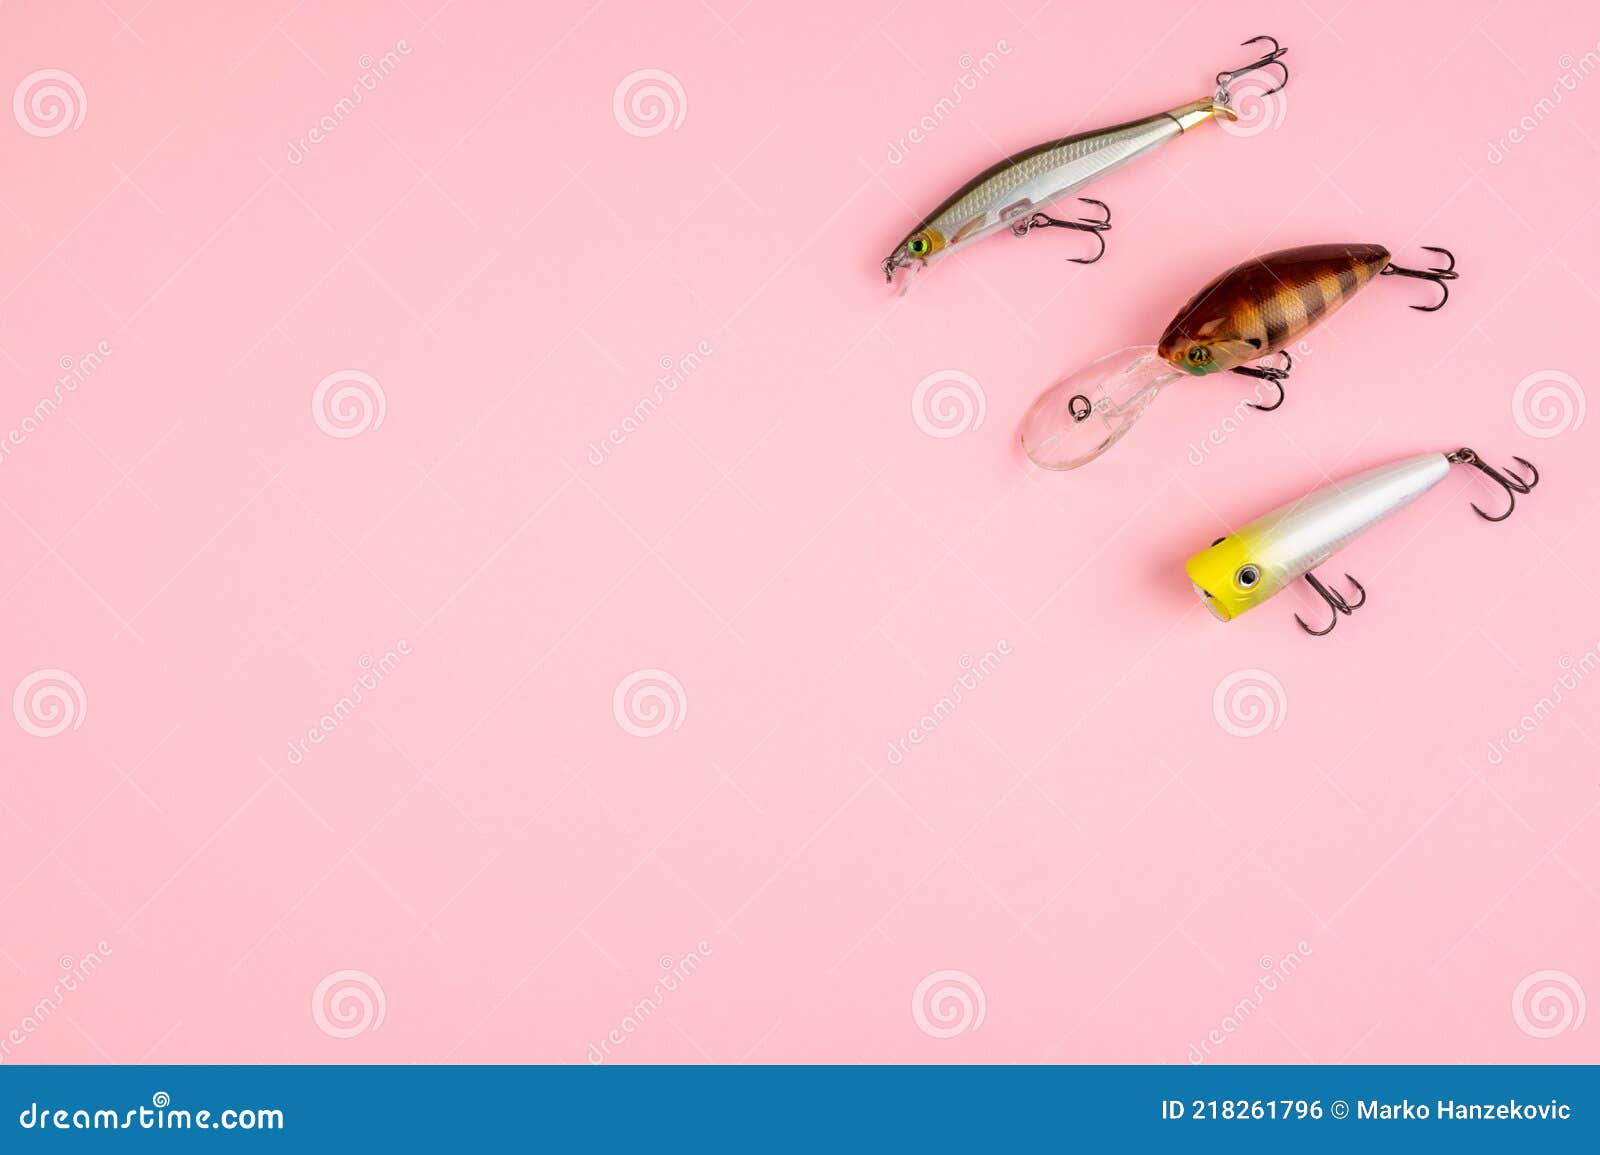 https://thumbs.dreamstime.com/z/bass-fishing-lures-pink-backdrop-bass-fishing-concept-pink-trendy-background-flat-lay-style-fishing-tackle-soft-218261796.jpg